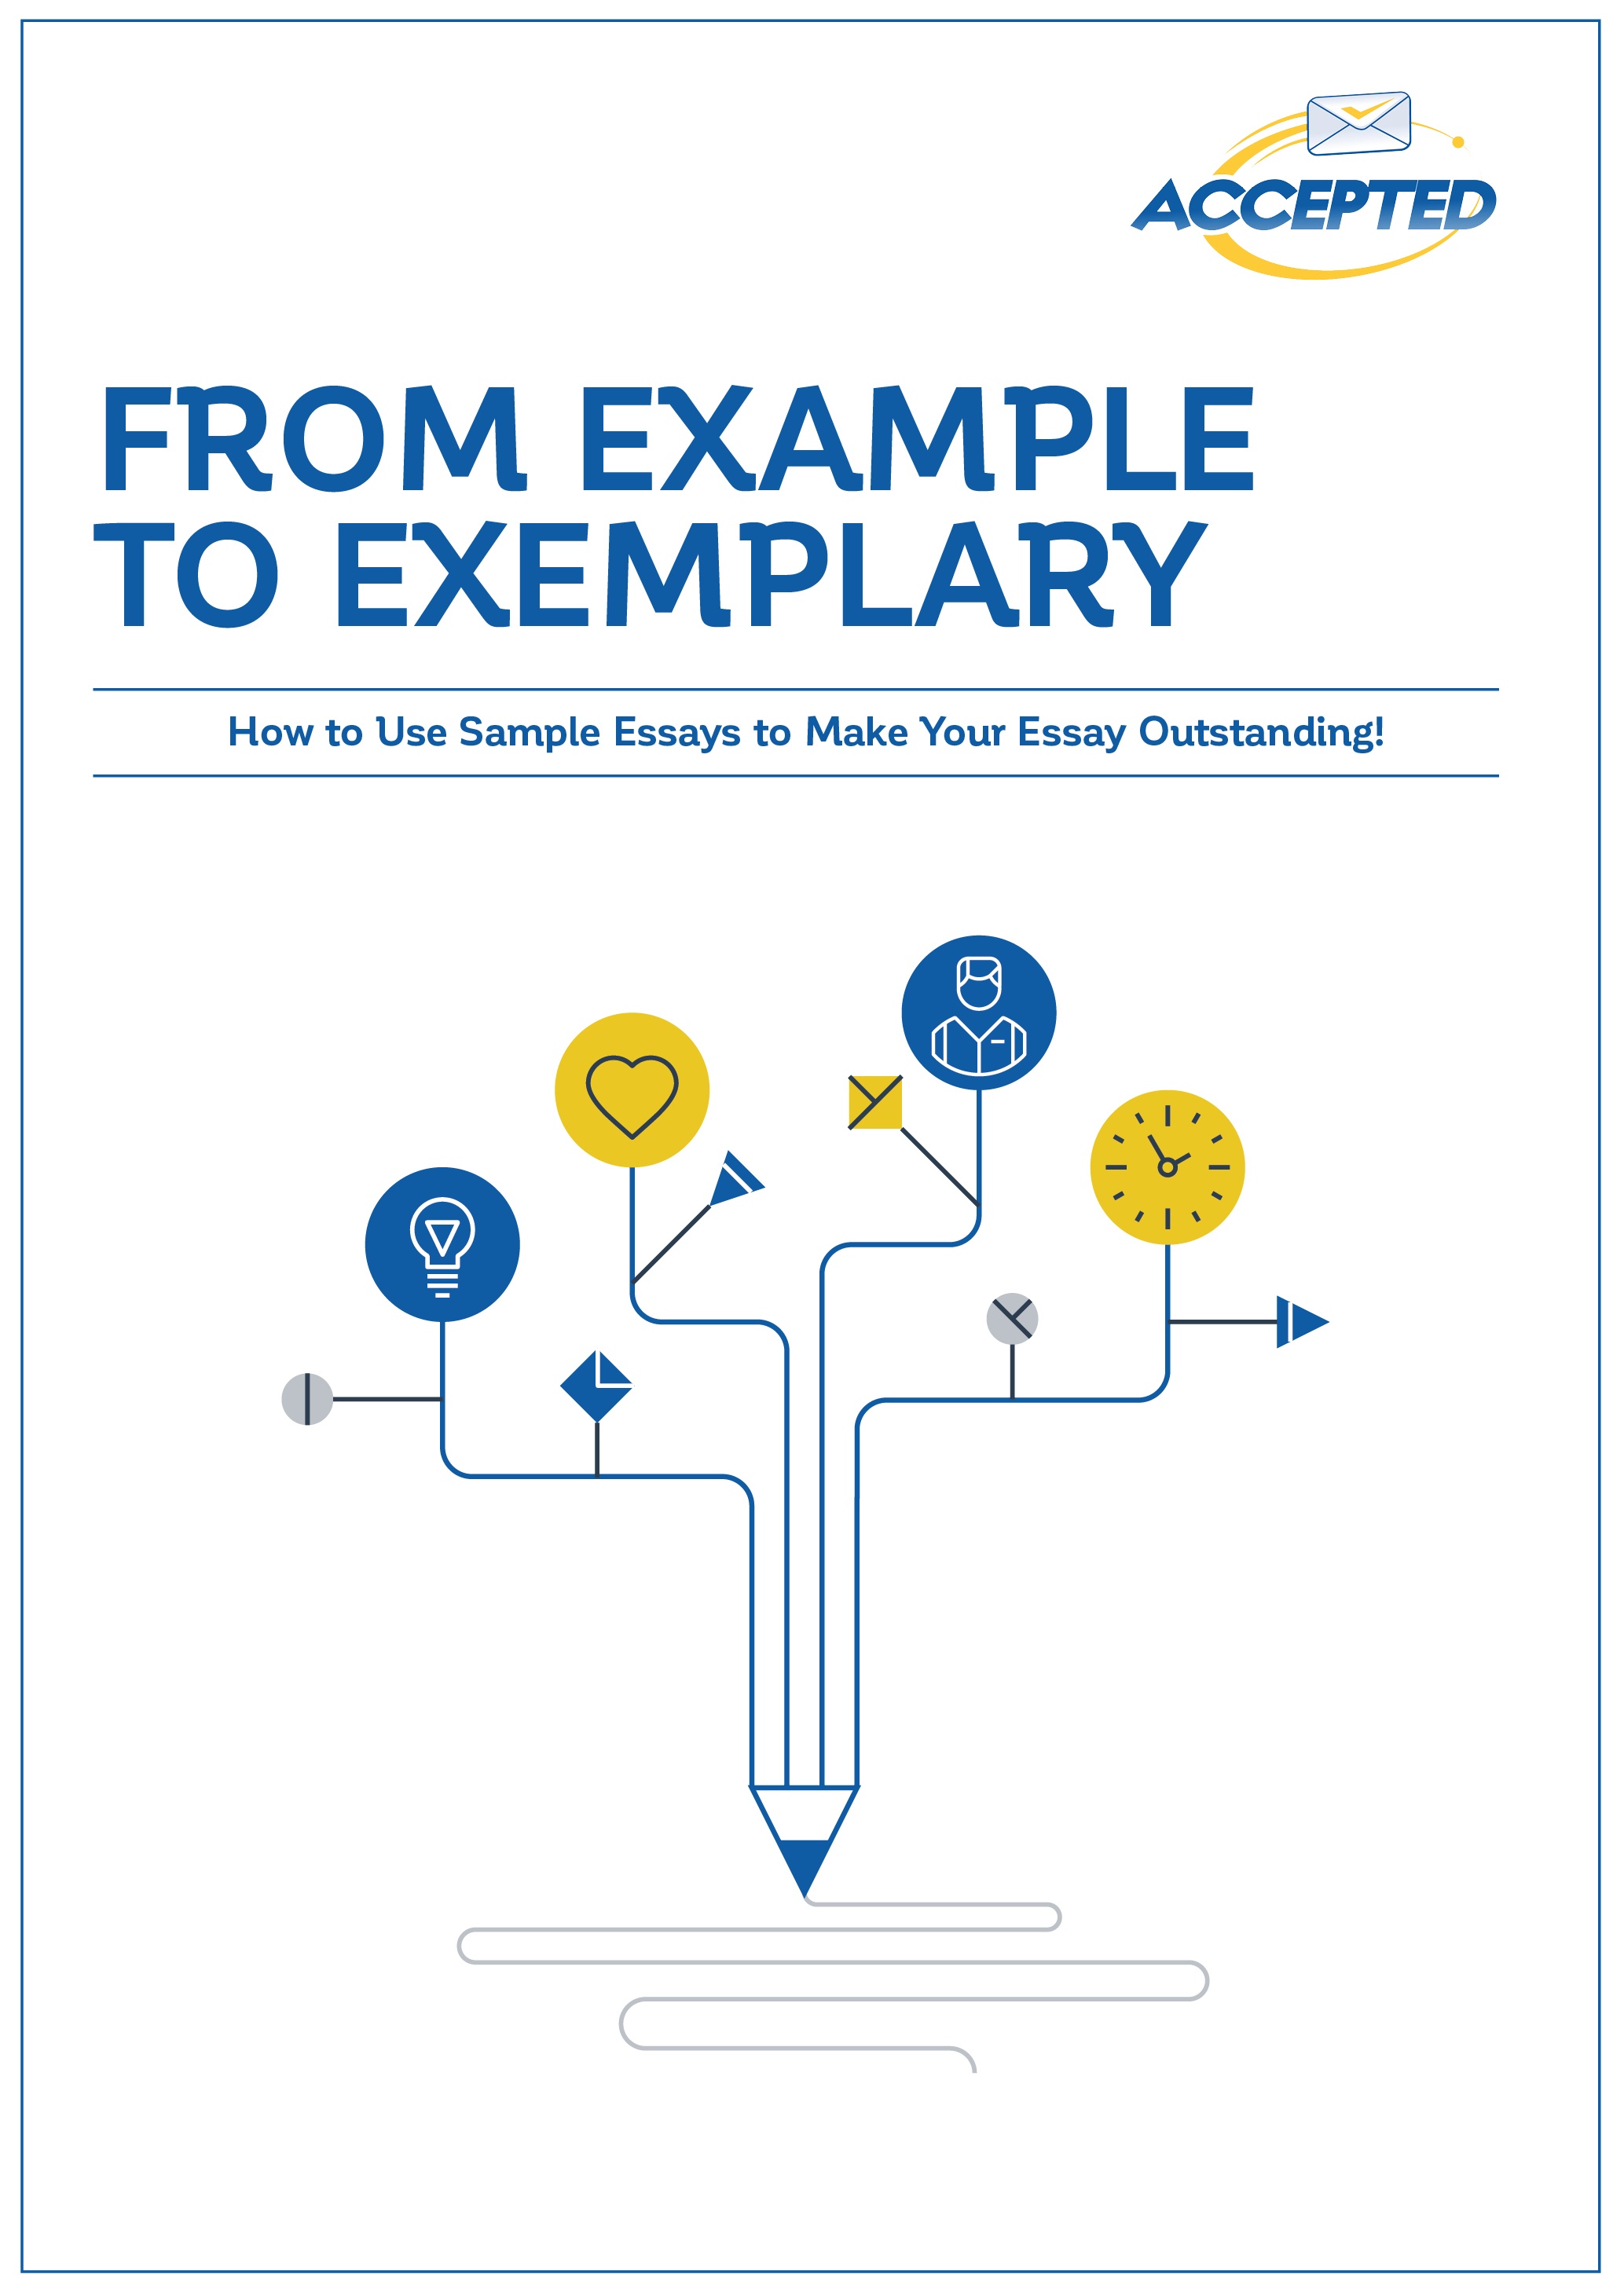 From Example to Exemplary